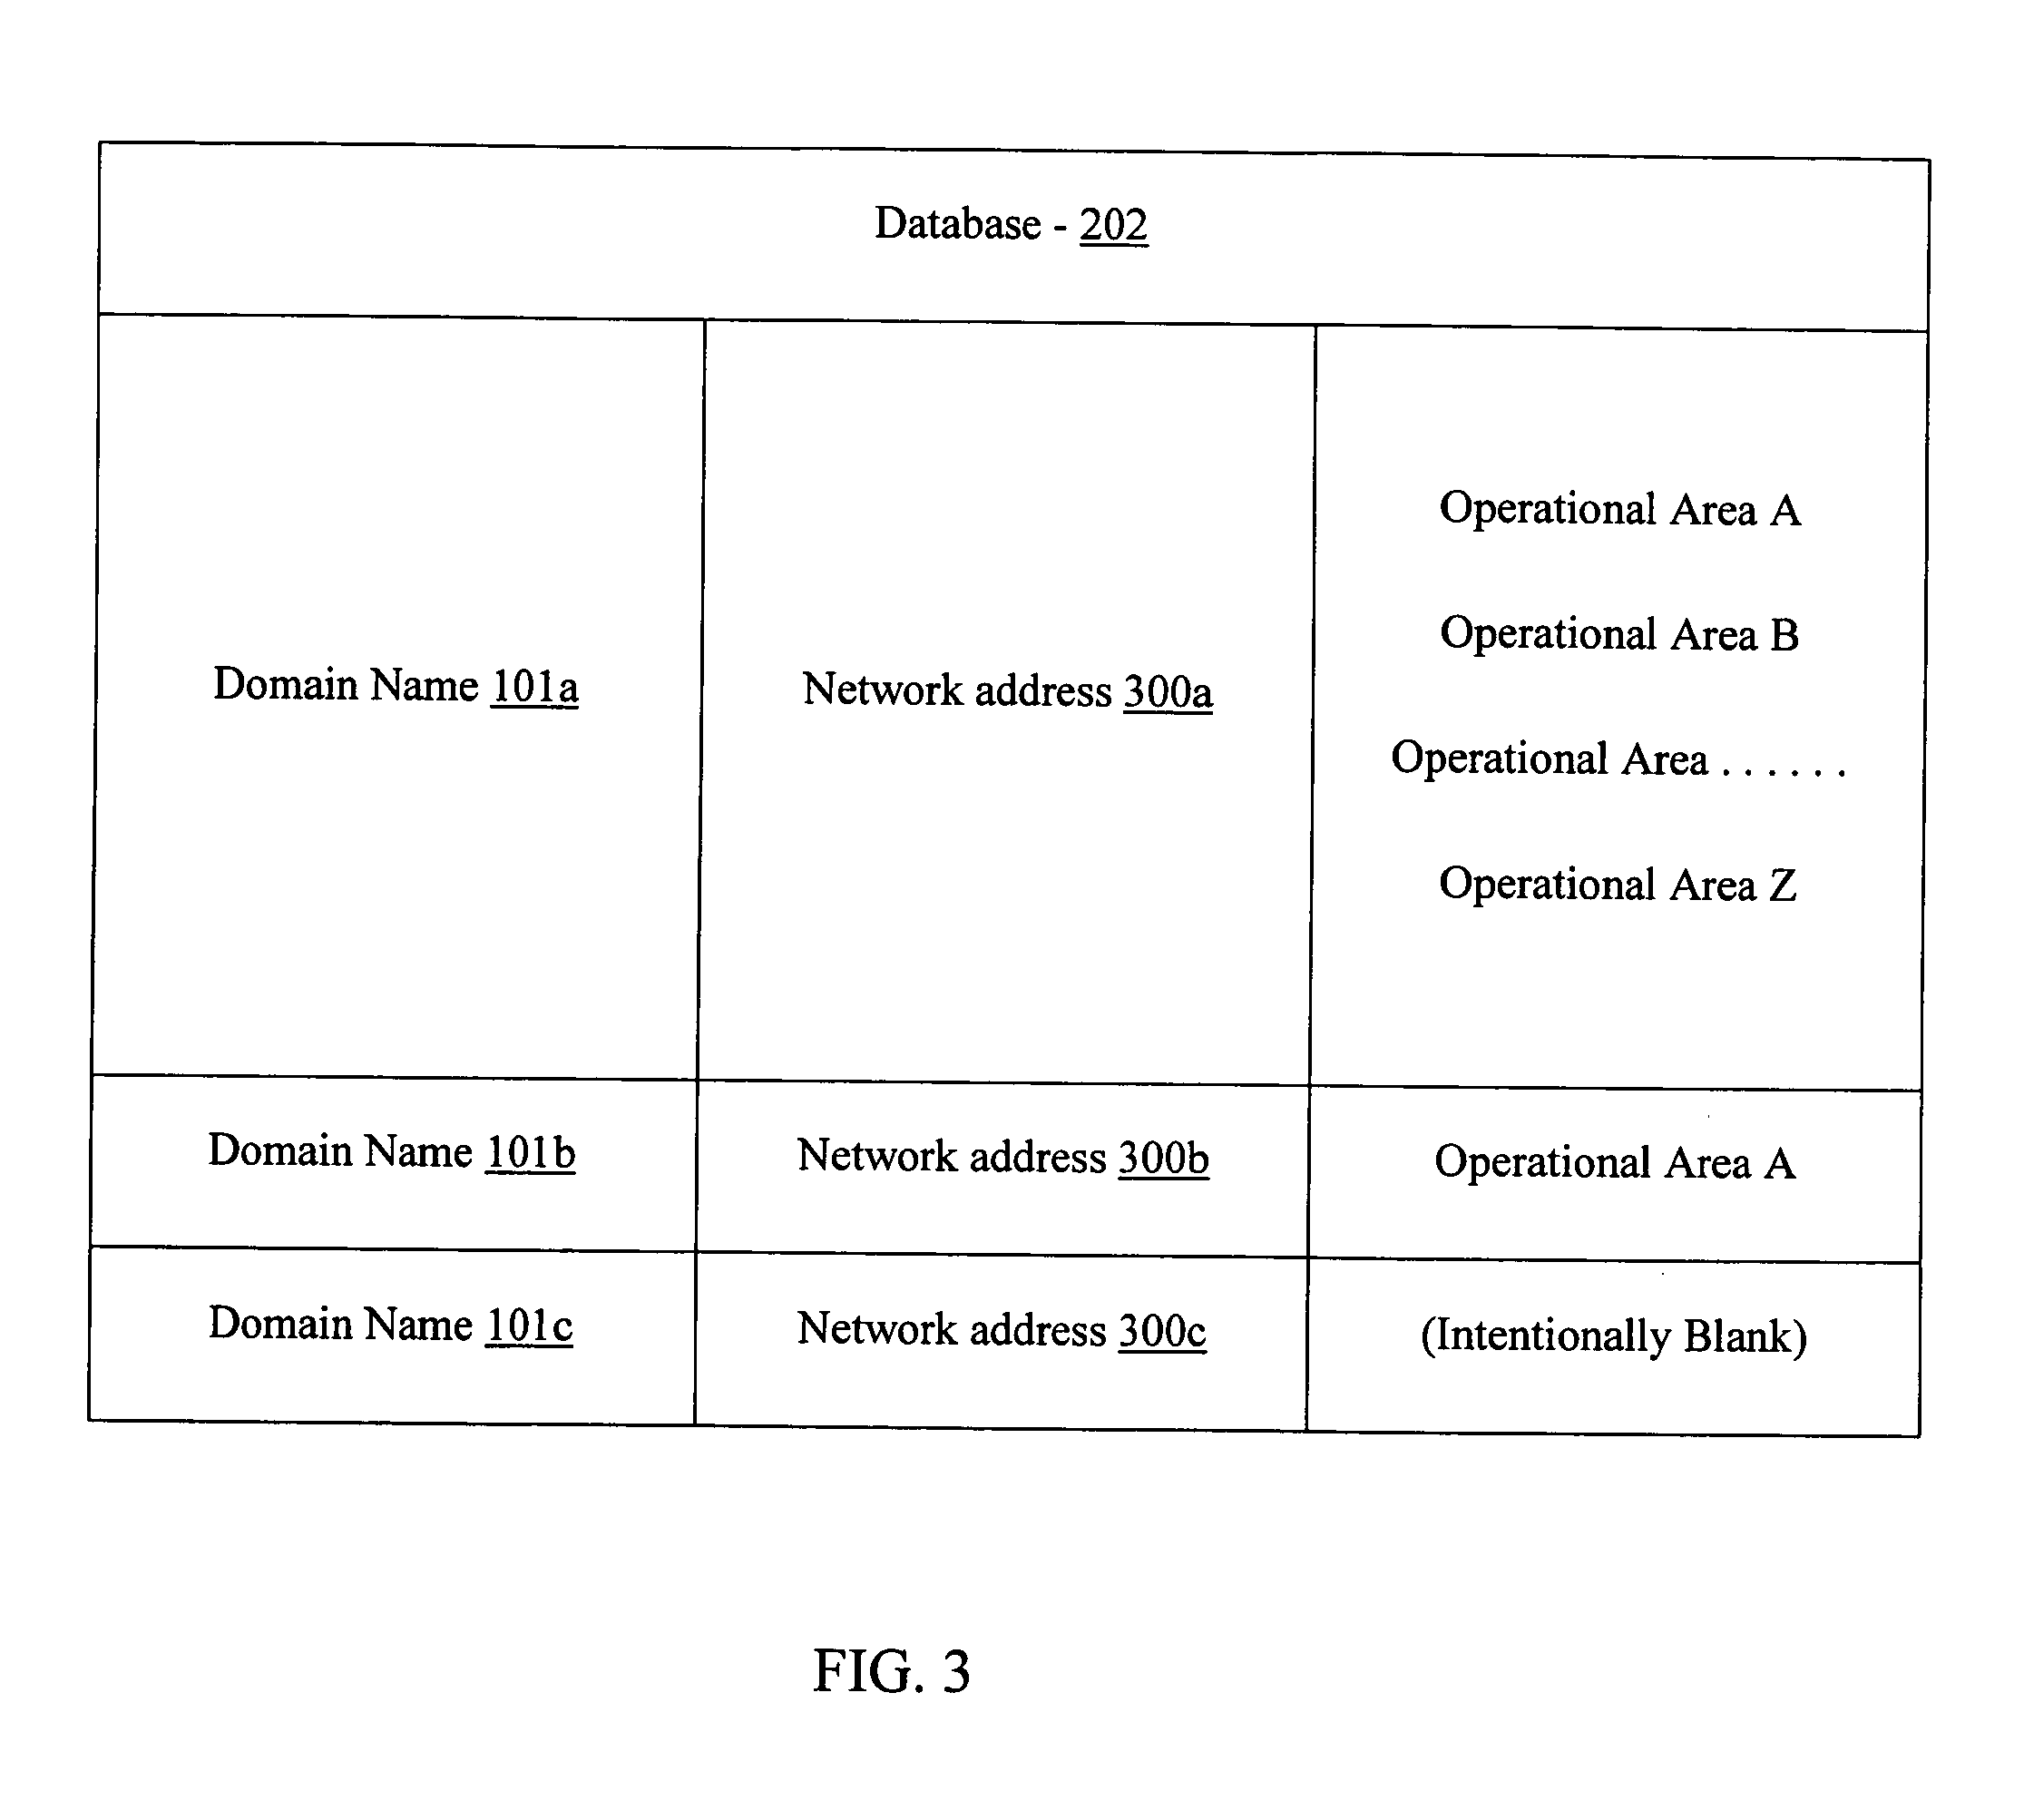 Creation of a database storing domain names and business operational areas